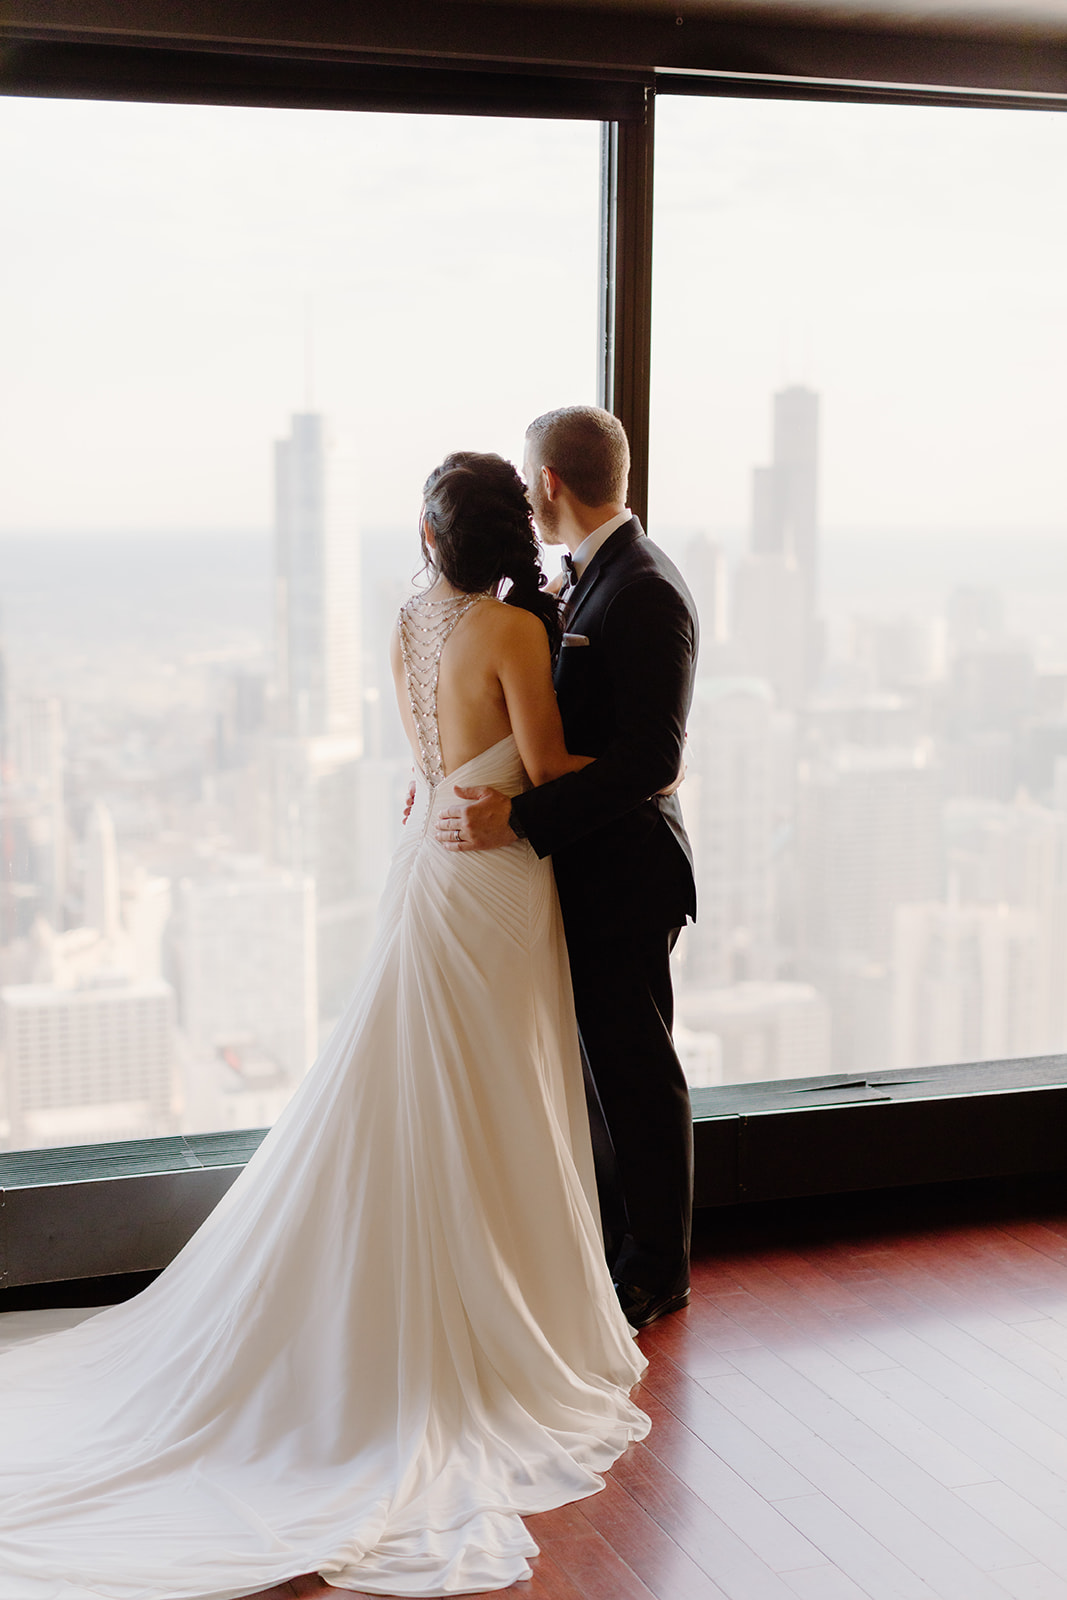 Bride and Groom holding hands with the city scape of Chicago behind them from high up at the Signature Room at the 95th